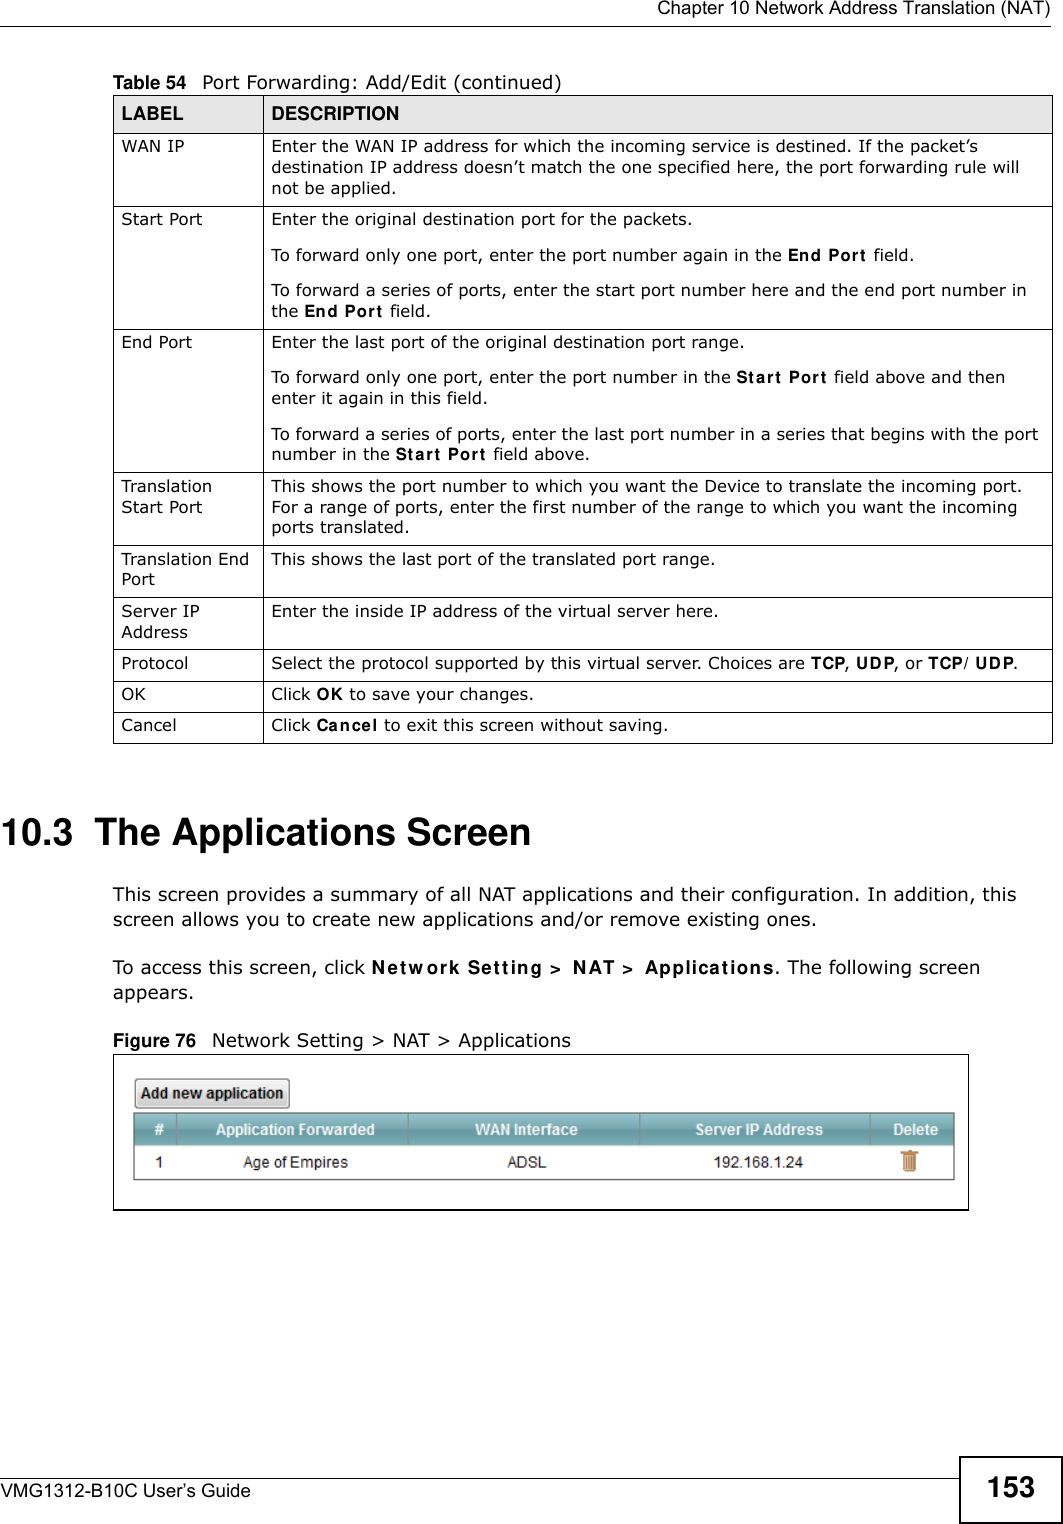  Chapter 10 Network Address Translation (NAT)VMG1312-B10C User’s Guide 15310.3  The Applications ScreenThis screen provides a summary of all NAT applications and their configuration. In addition, this screen allows you to create new applications and/or remove existing ones.To access this screen, click N et w or k  Set t ing &gt;  N AT &gt;  Applica t ions. The following screen appears.Figure 76   Network Setting &gt; NAT &gt; ApplicationsWAN IP Enter the WAN IP address for which the incoming service is destined. If the packet’s destination IP address doesn’t match the one specified here, the port forwarding rule will not be applied.Start Port Enter the original destination port for the packets.To forward only one port, enter the port number again in the End Port  field. To forward a series of ports, enter the start port number here and the end port number in the En d Port  field.End Port  Enter the last port of the original destination port range. To forward only one port, enter the port number in the St a r t  Por t  field above and then enter it again in this field. To forward a series of ports, enter the last port number in a series that begins with the port number in the St a rt  Port  field above.Translation Start PortThis shows the port number to which you want the Device to translate the incoming port. For a range of ports, enter the first number of the range to which you want the incoming ports translated.Translation End Port This shows the last port of the translated port range.Server IP AddressEnter the inside IP address of the virtual server here.Protocol Select the protocol supported by this virtual server. Choices are TCP, UD P, or TCP/ UDP.OK Click OK to save your changes.Cancel Click Cancel to exit this screen without saving.Table 54   Port Forwarding: Add/Edit (continued)LABEL DESCRIPTION